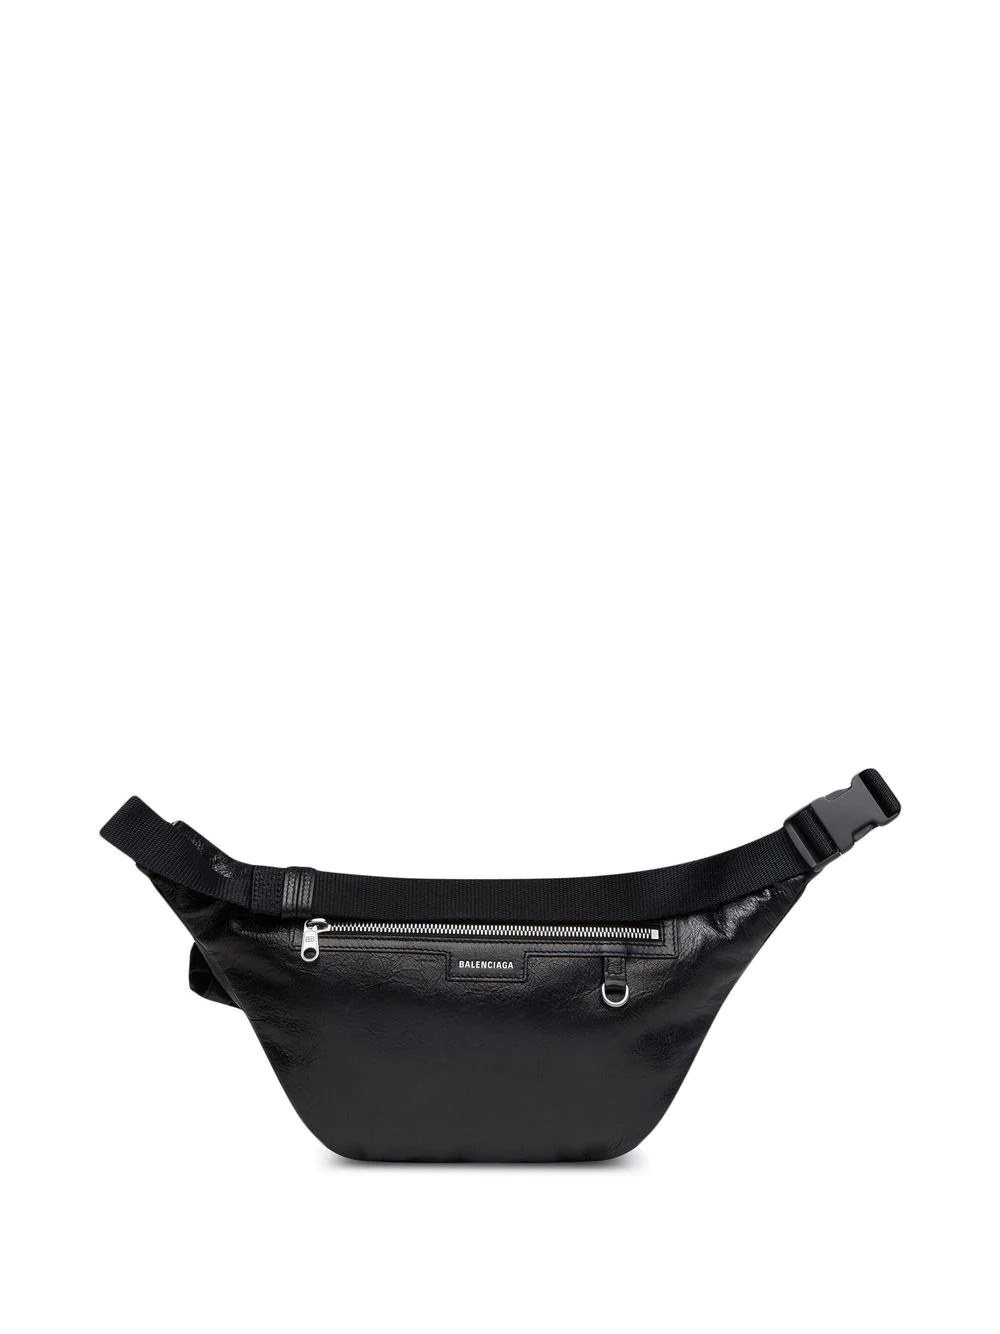 Super Busy branded fanny pack - 2